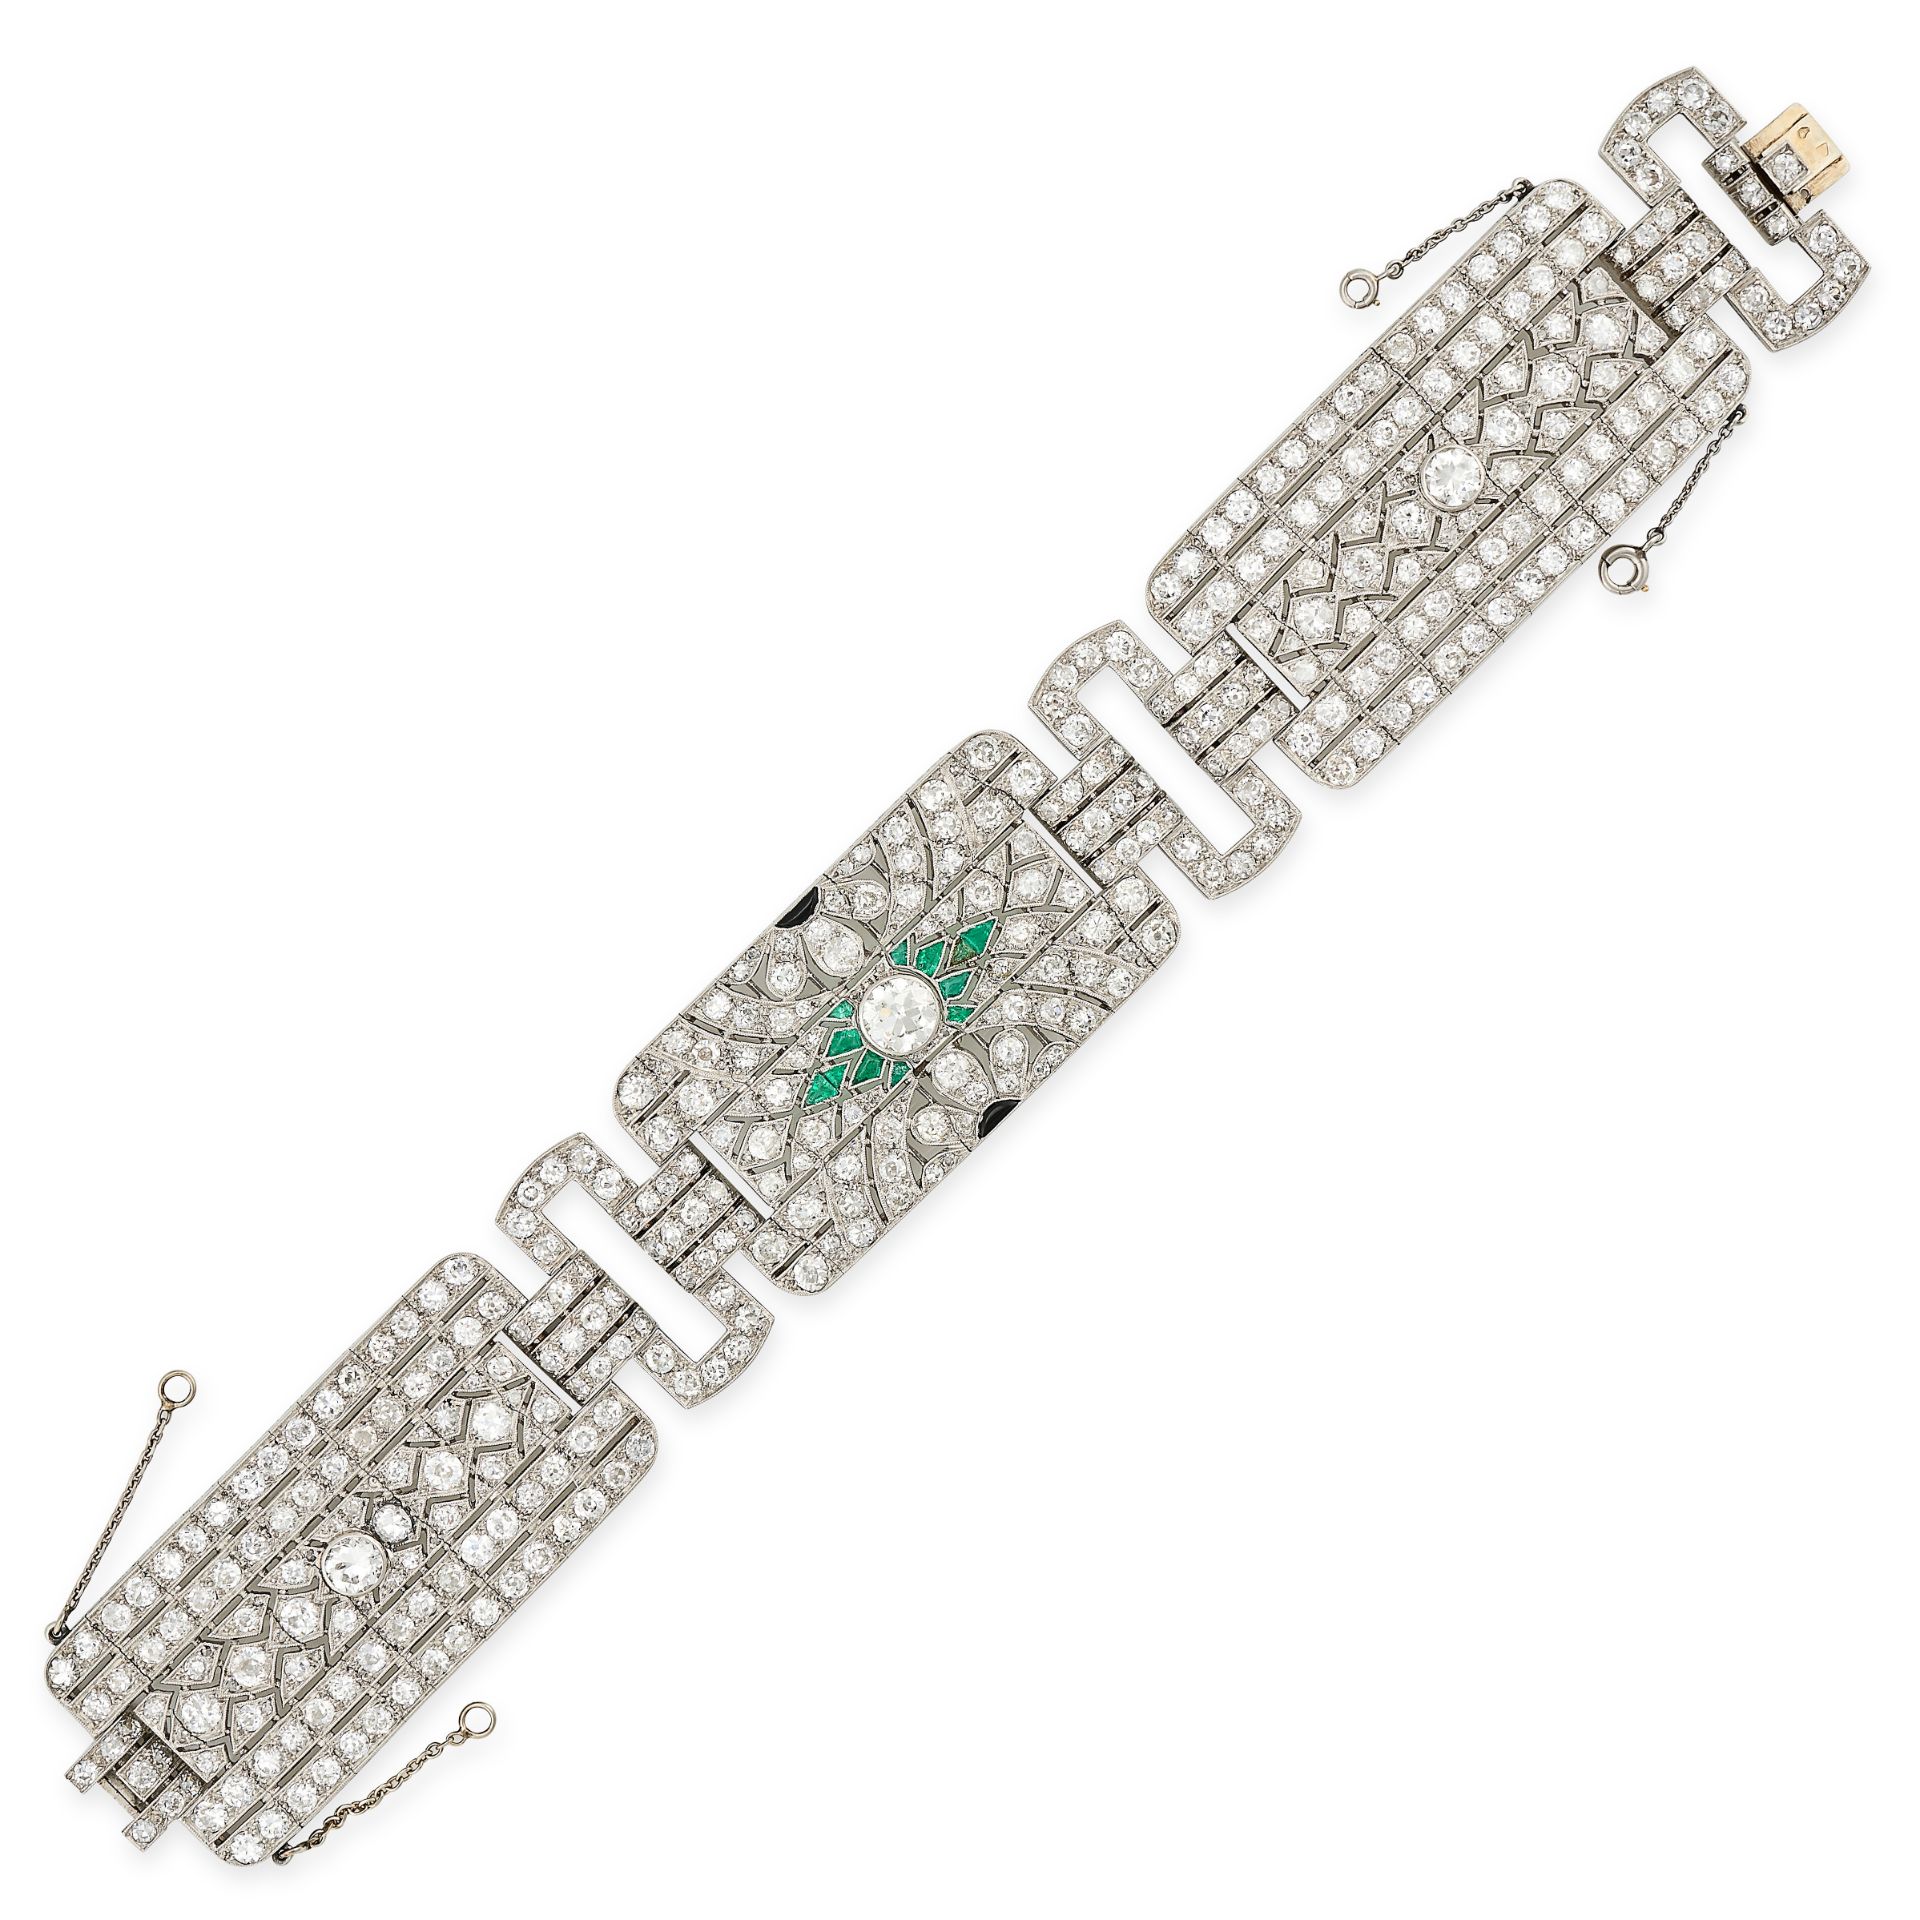 A FINE FRENCH ART DECO DIAMOND, EMERALD AND ONYX BRACELET in platinum and 18ct yellow gold,